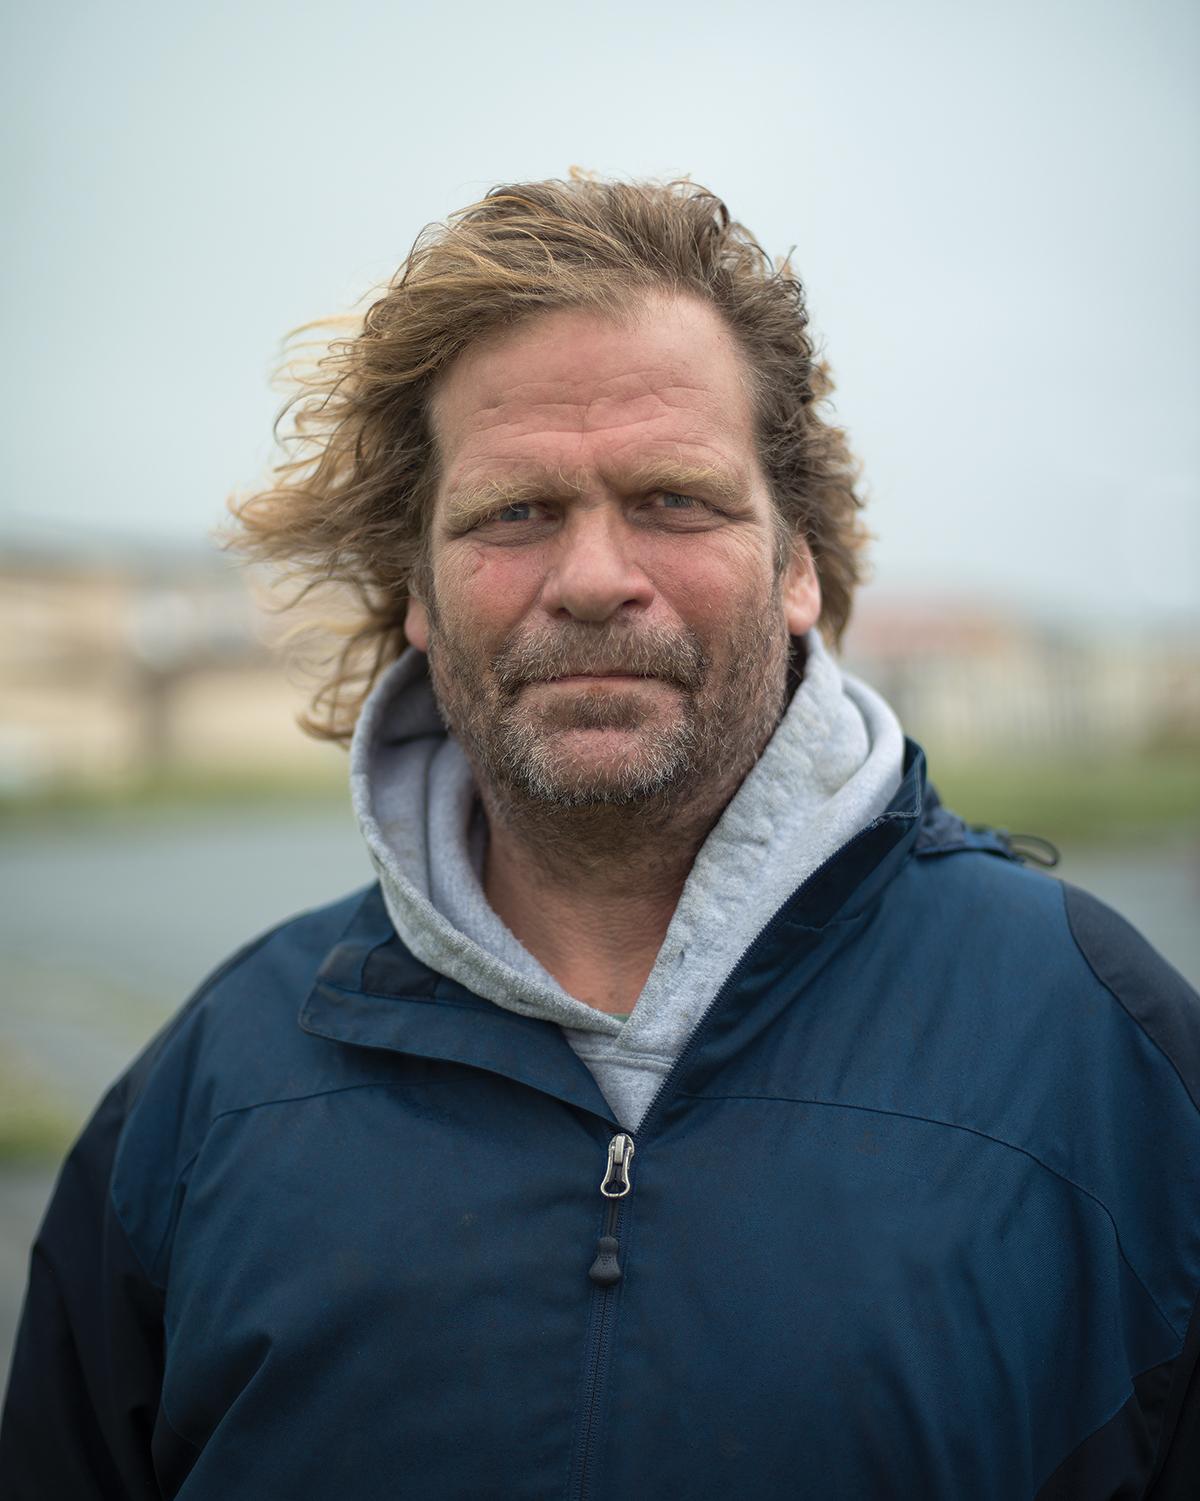 Portrait of man with hair blowing in wind